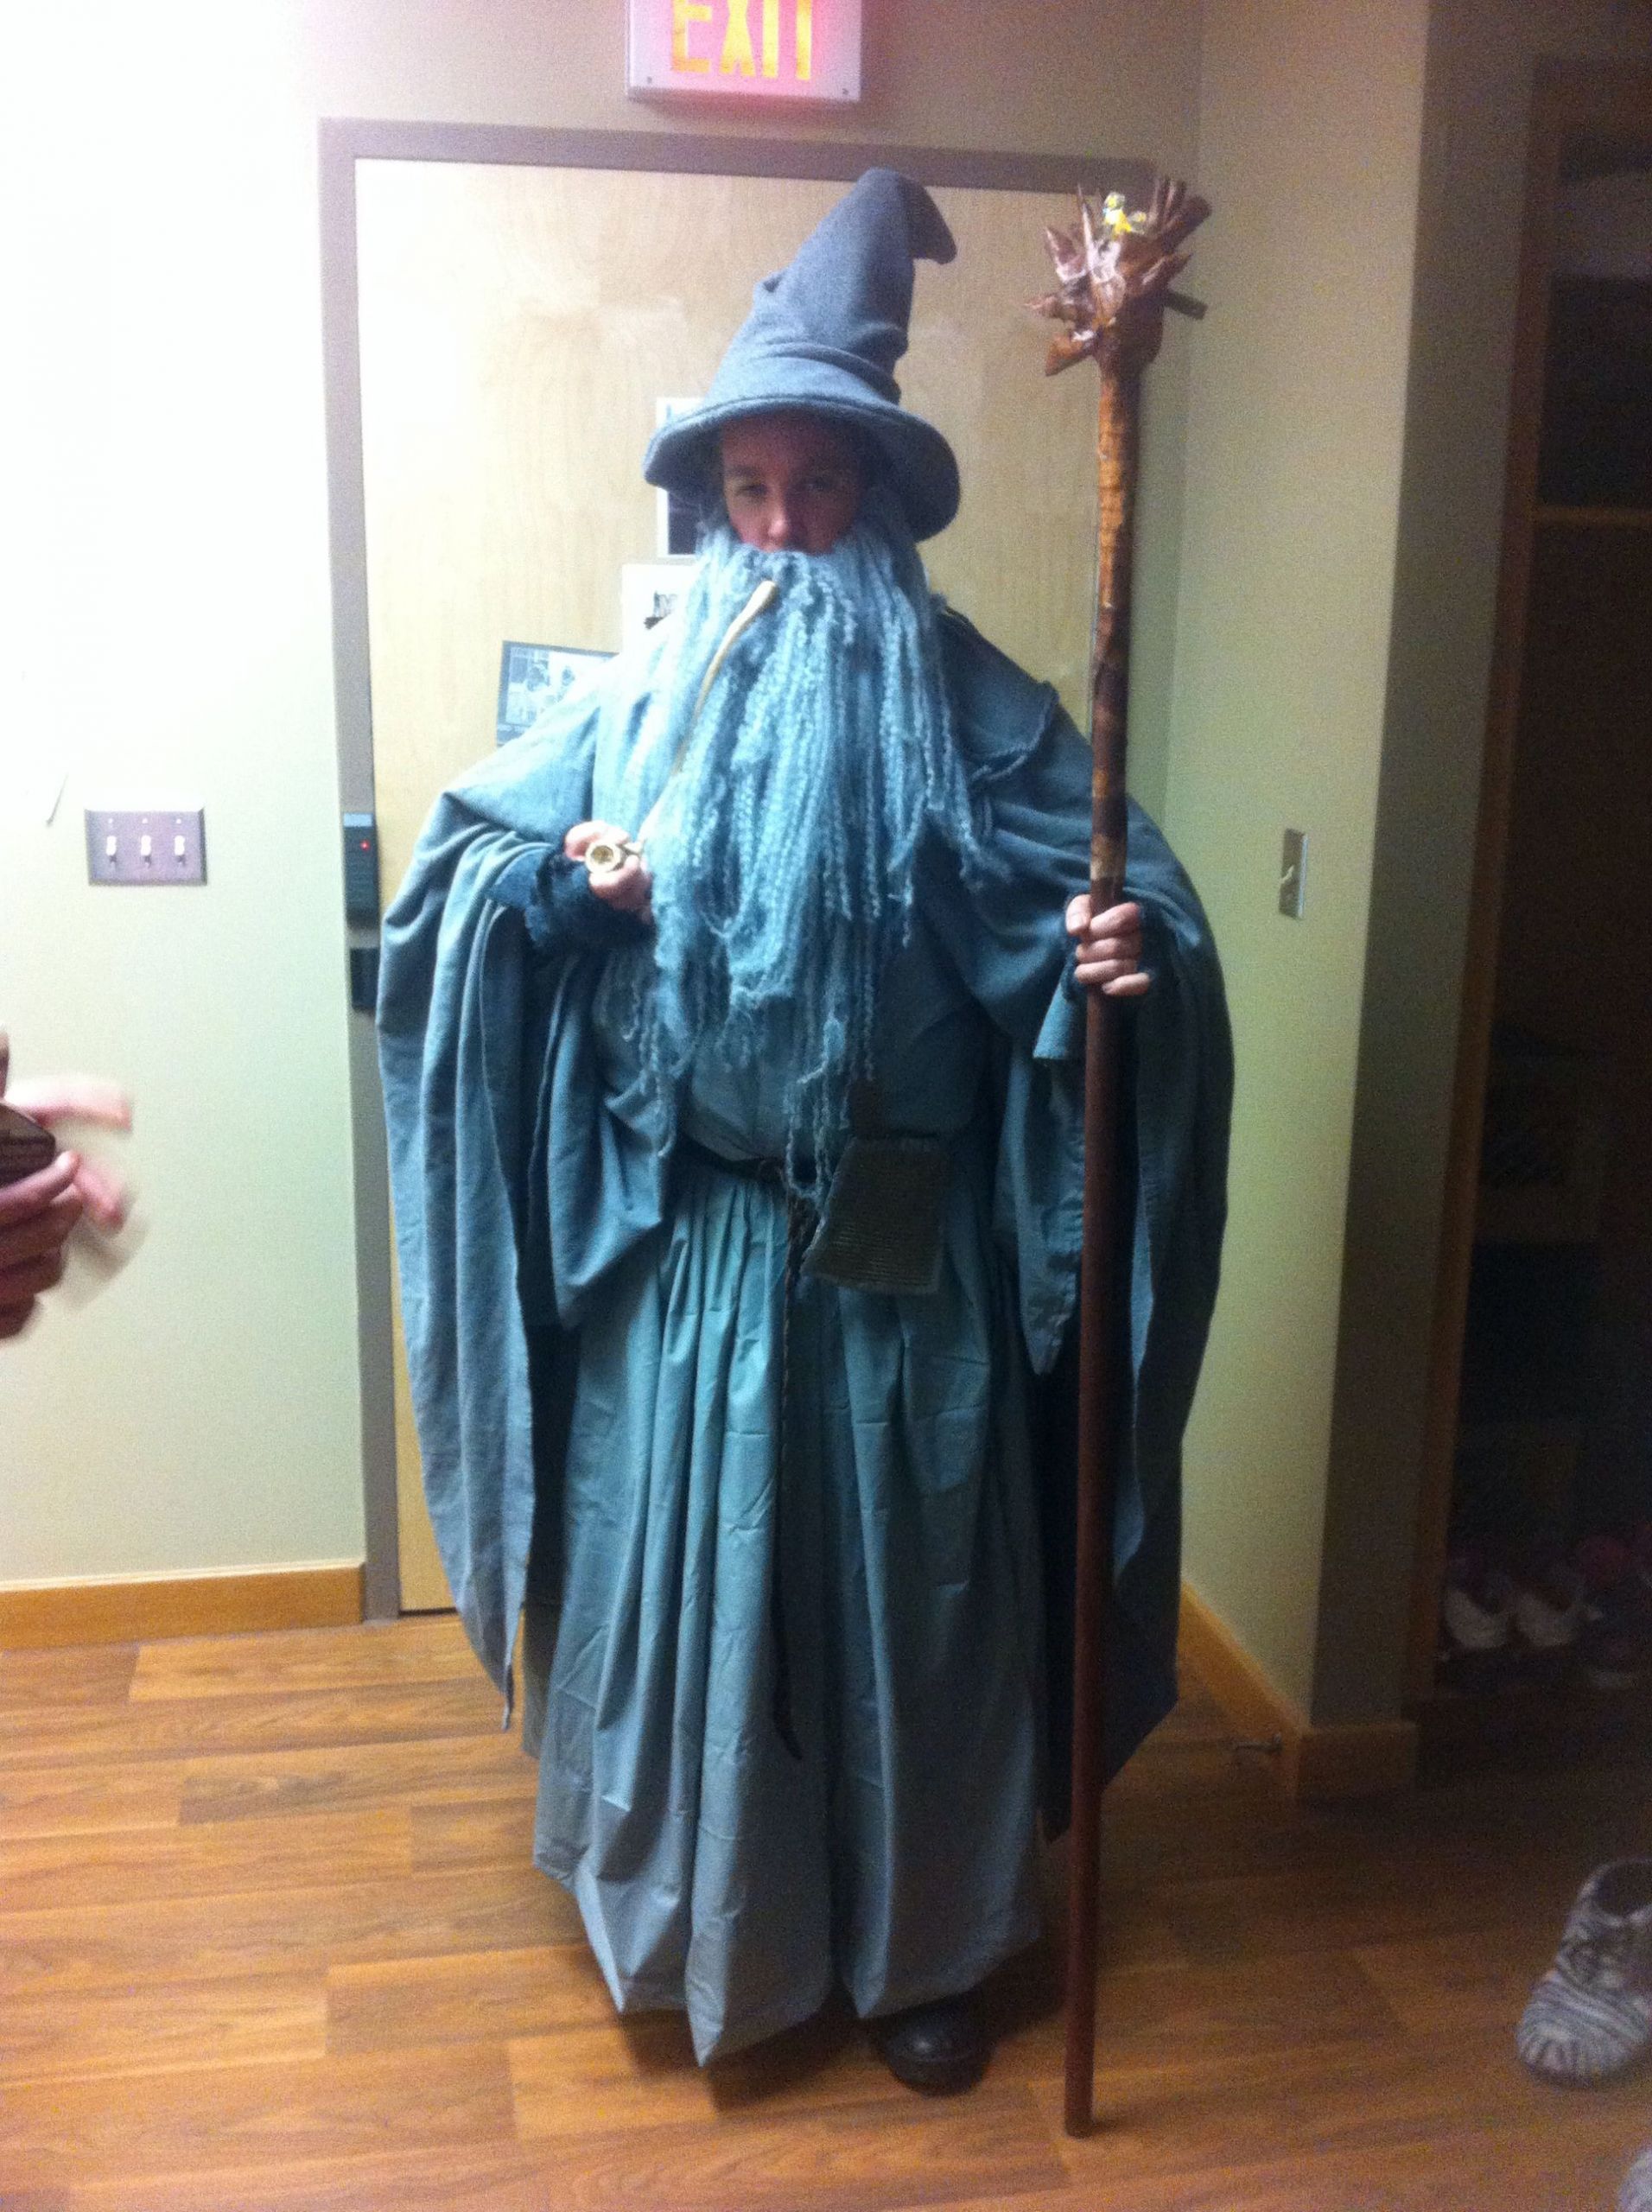 Gandalf Costume DIY
 DIY Gandalf costume made from old bed sheets and a sweater